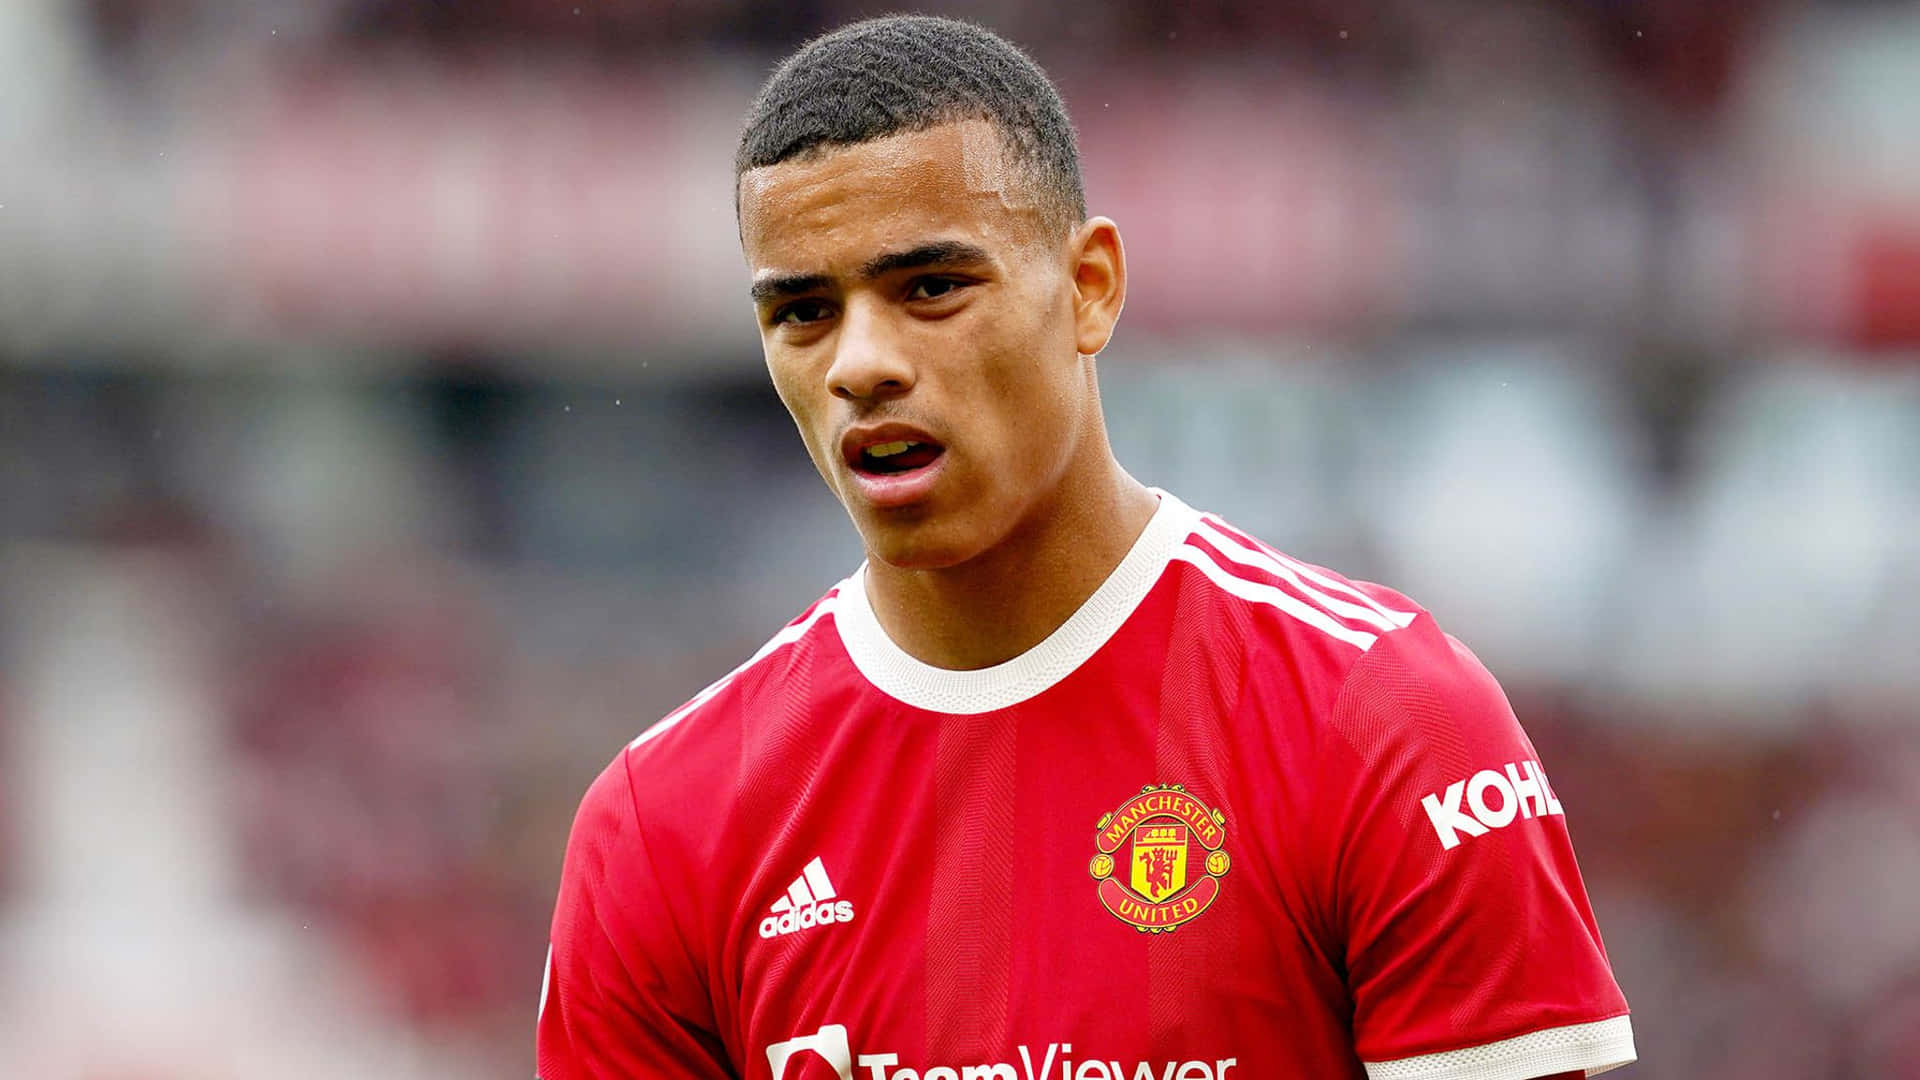 Manchester United's young sensation Mason Greenwood in action on the field.